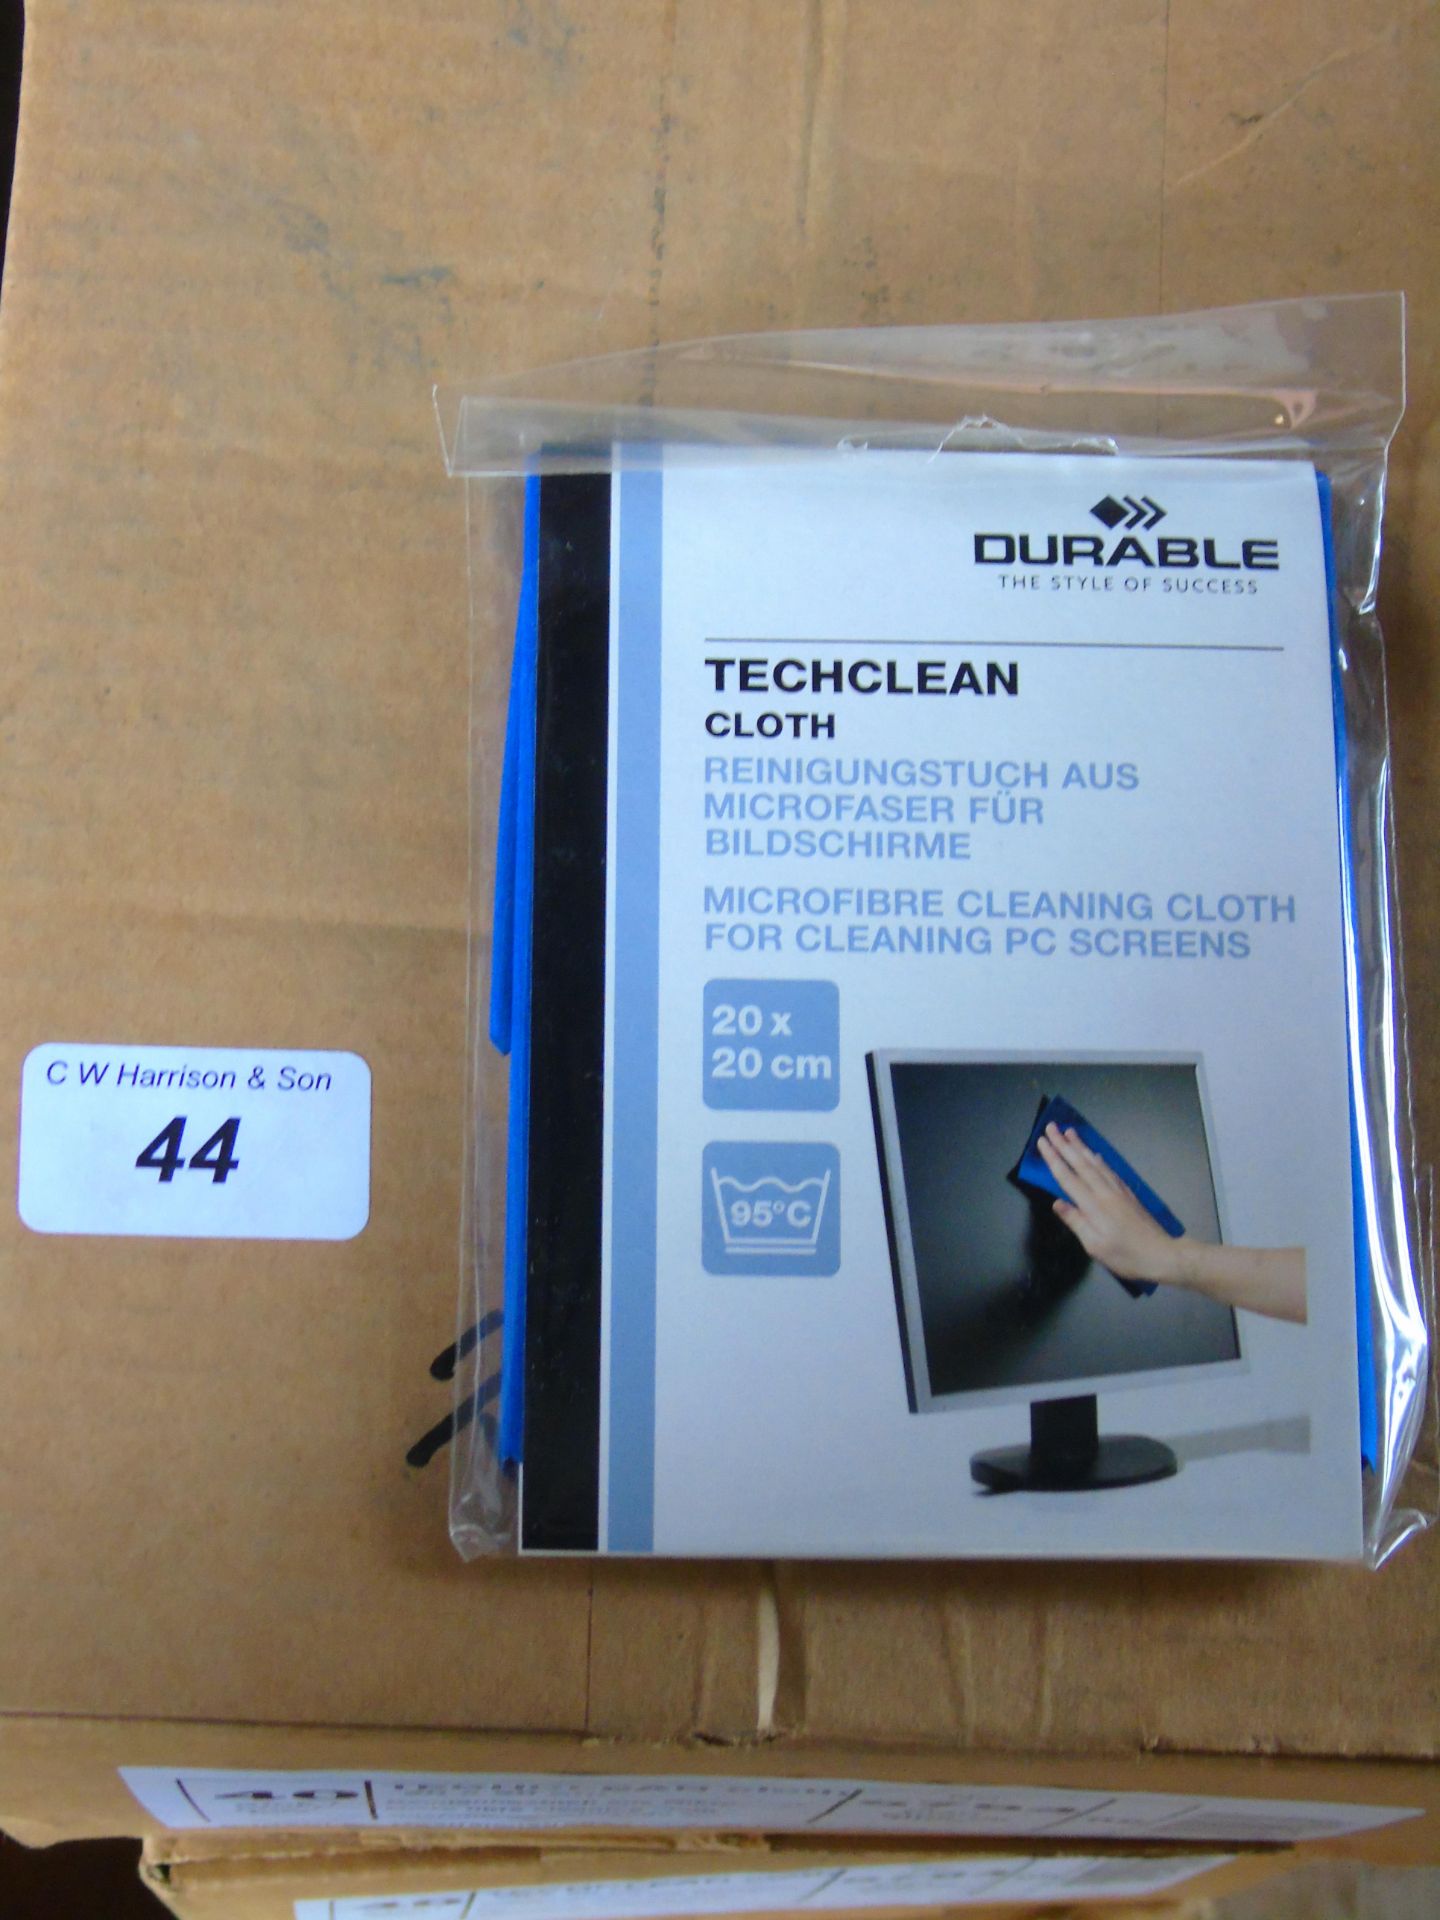 3 x boxes of 40 Durable TechClean IT reusable cleaning cloths in single retail packs - 120 cloths - Image 2 of 2